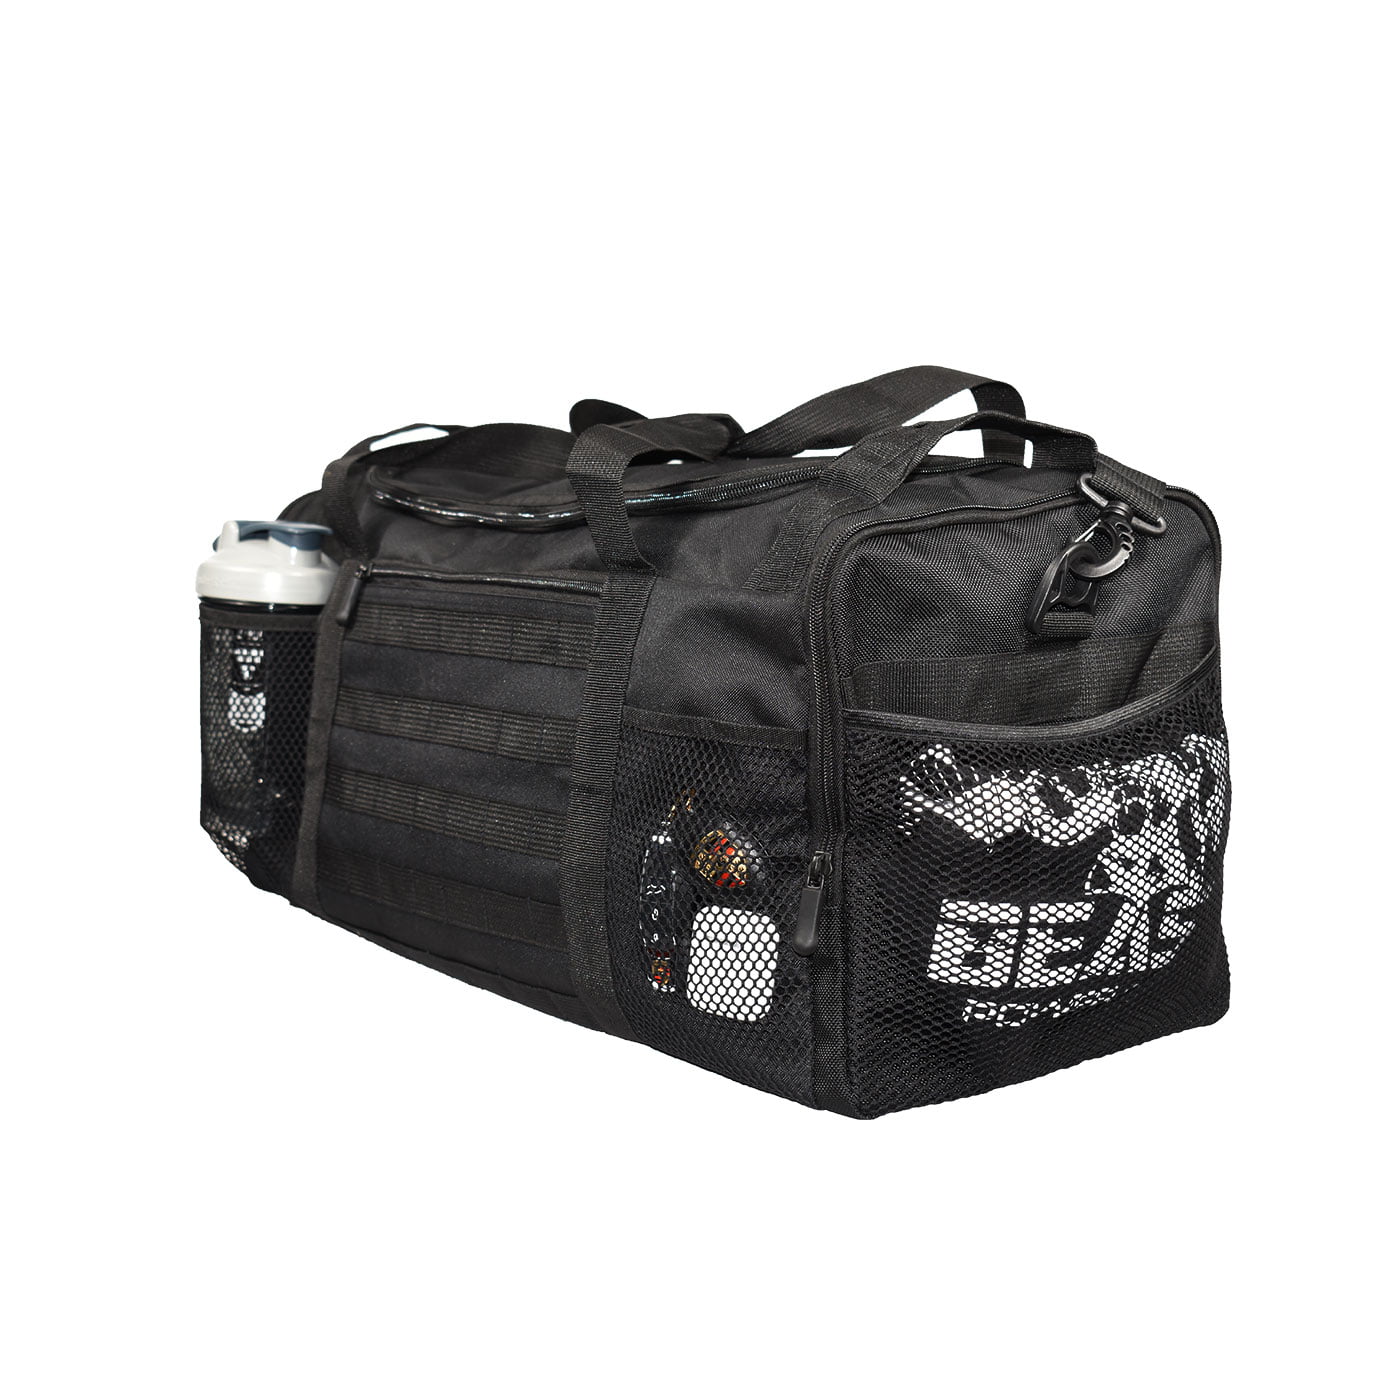 Beastpowergear Gym Duffle Bag- Workout, Boxing, MMA, Sports Bag with Shoes  Compartment and Adjustable Shoulder Strap for Men and Women.